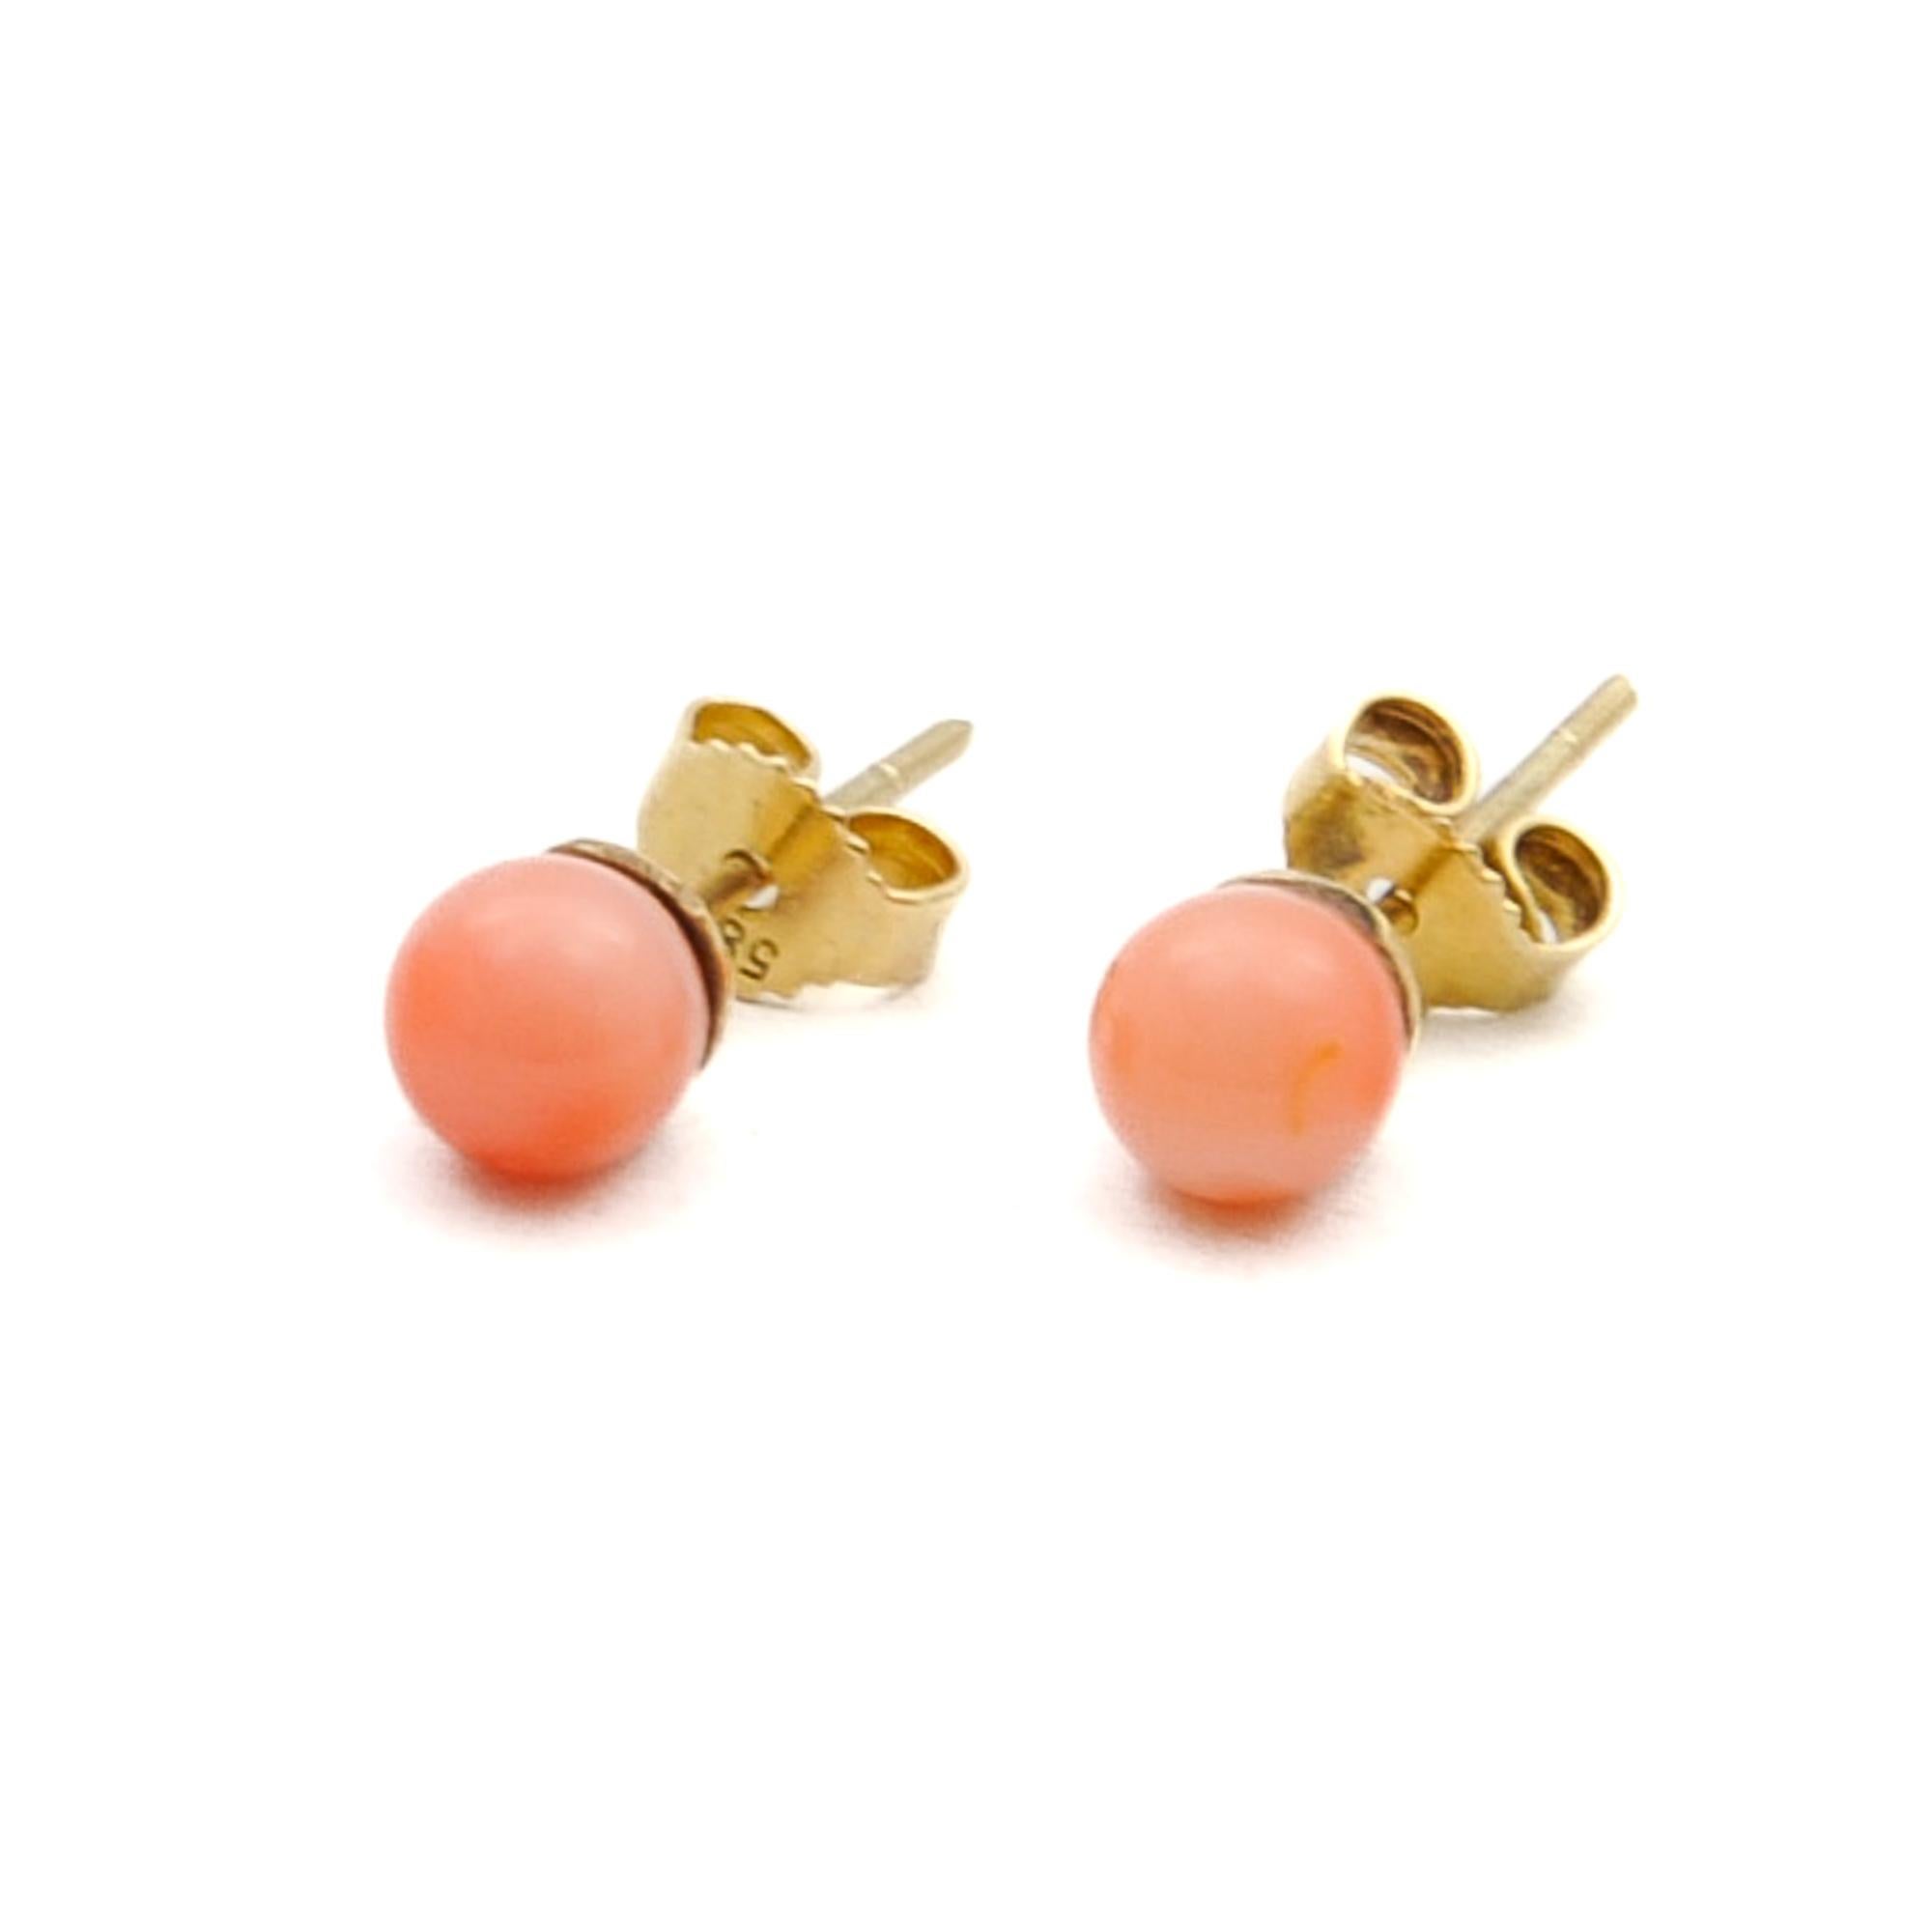 These lovely pink coral stud earrings are set in a 14 karat gold frame. The coral of these beautiful colored studs are round shaped and mottled with different hues of red pink. Coral is considered a symbol of renewal, vitality and beauty. The studs